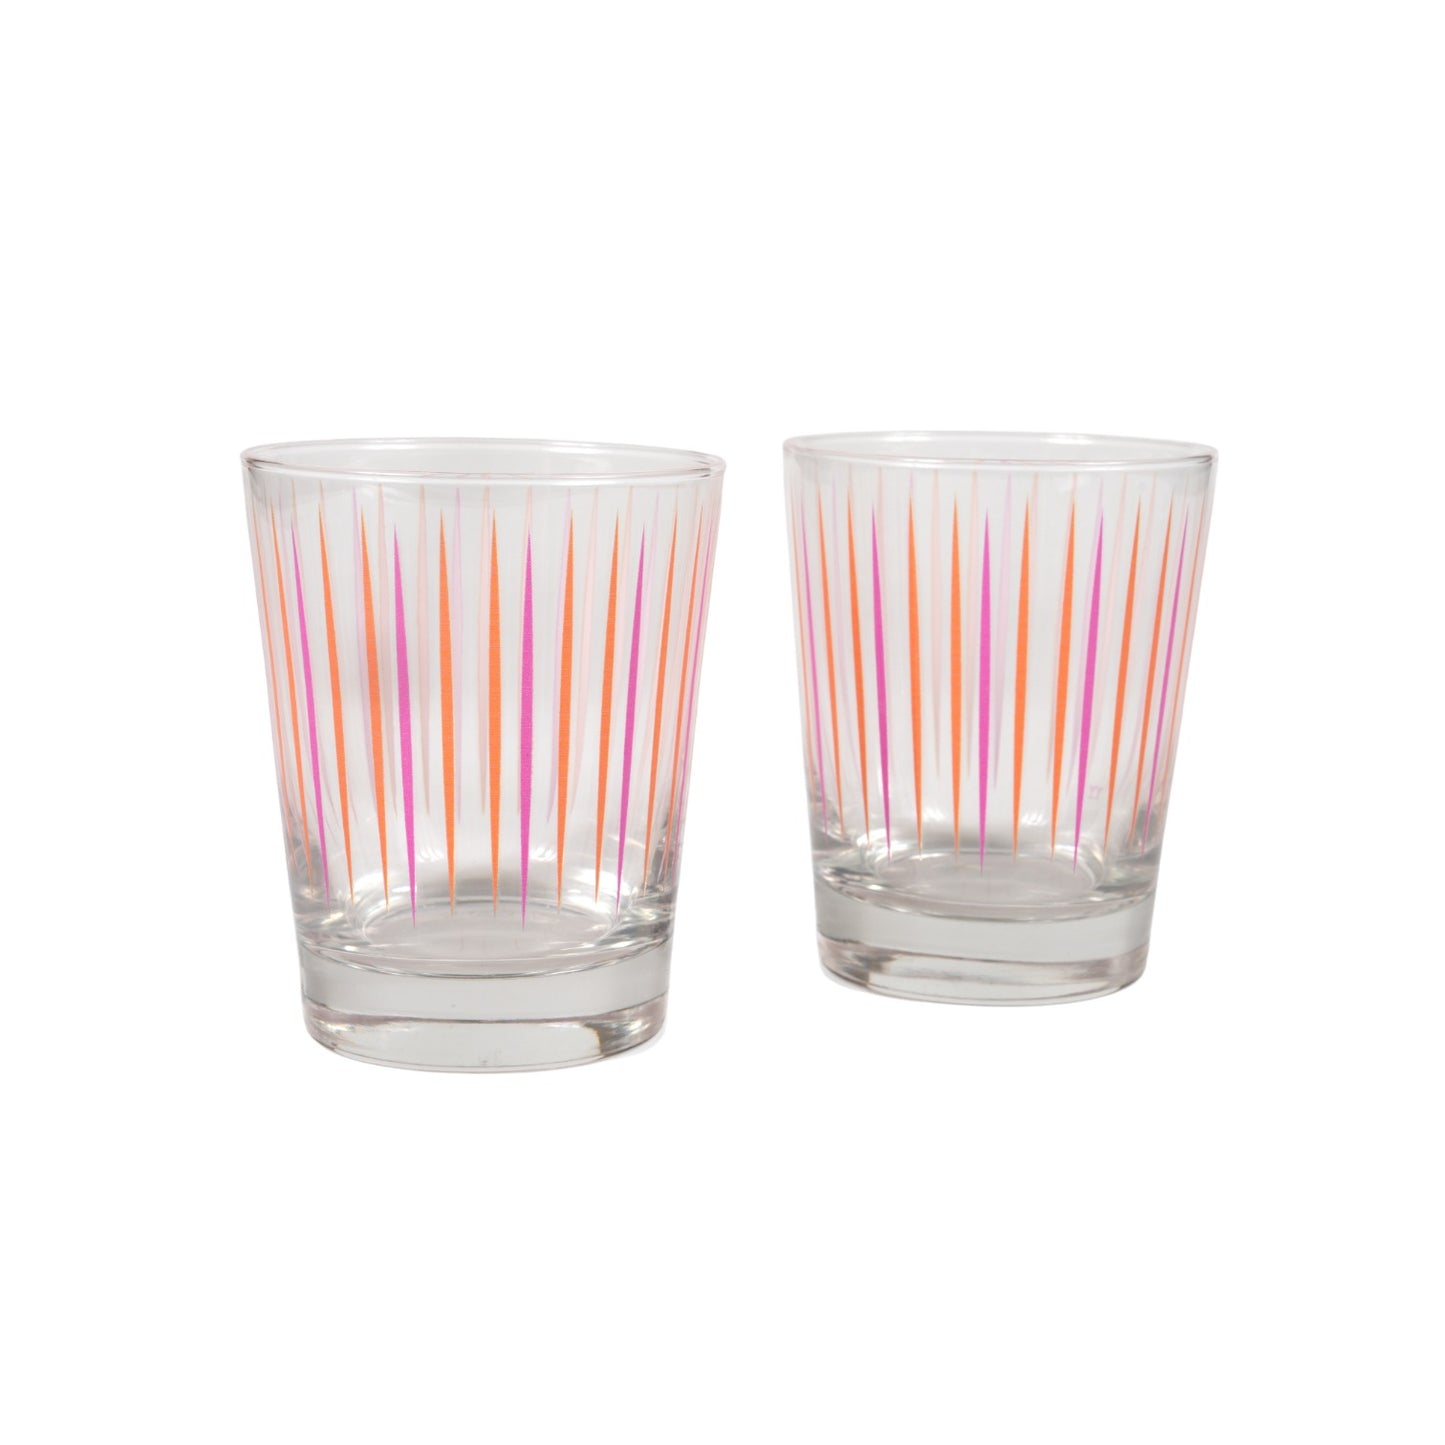 Set of 2 Vintage Double Old Fashioned Glasses with Retro Pink and Orange design